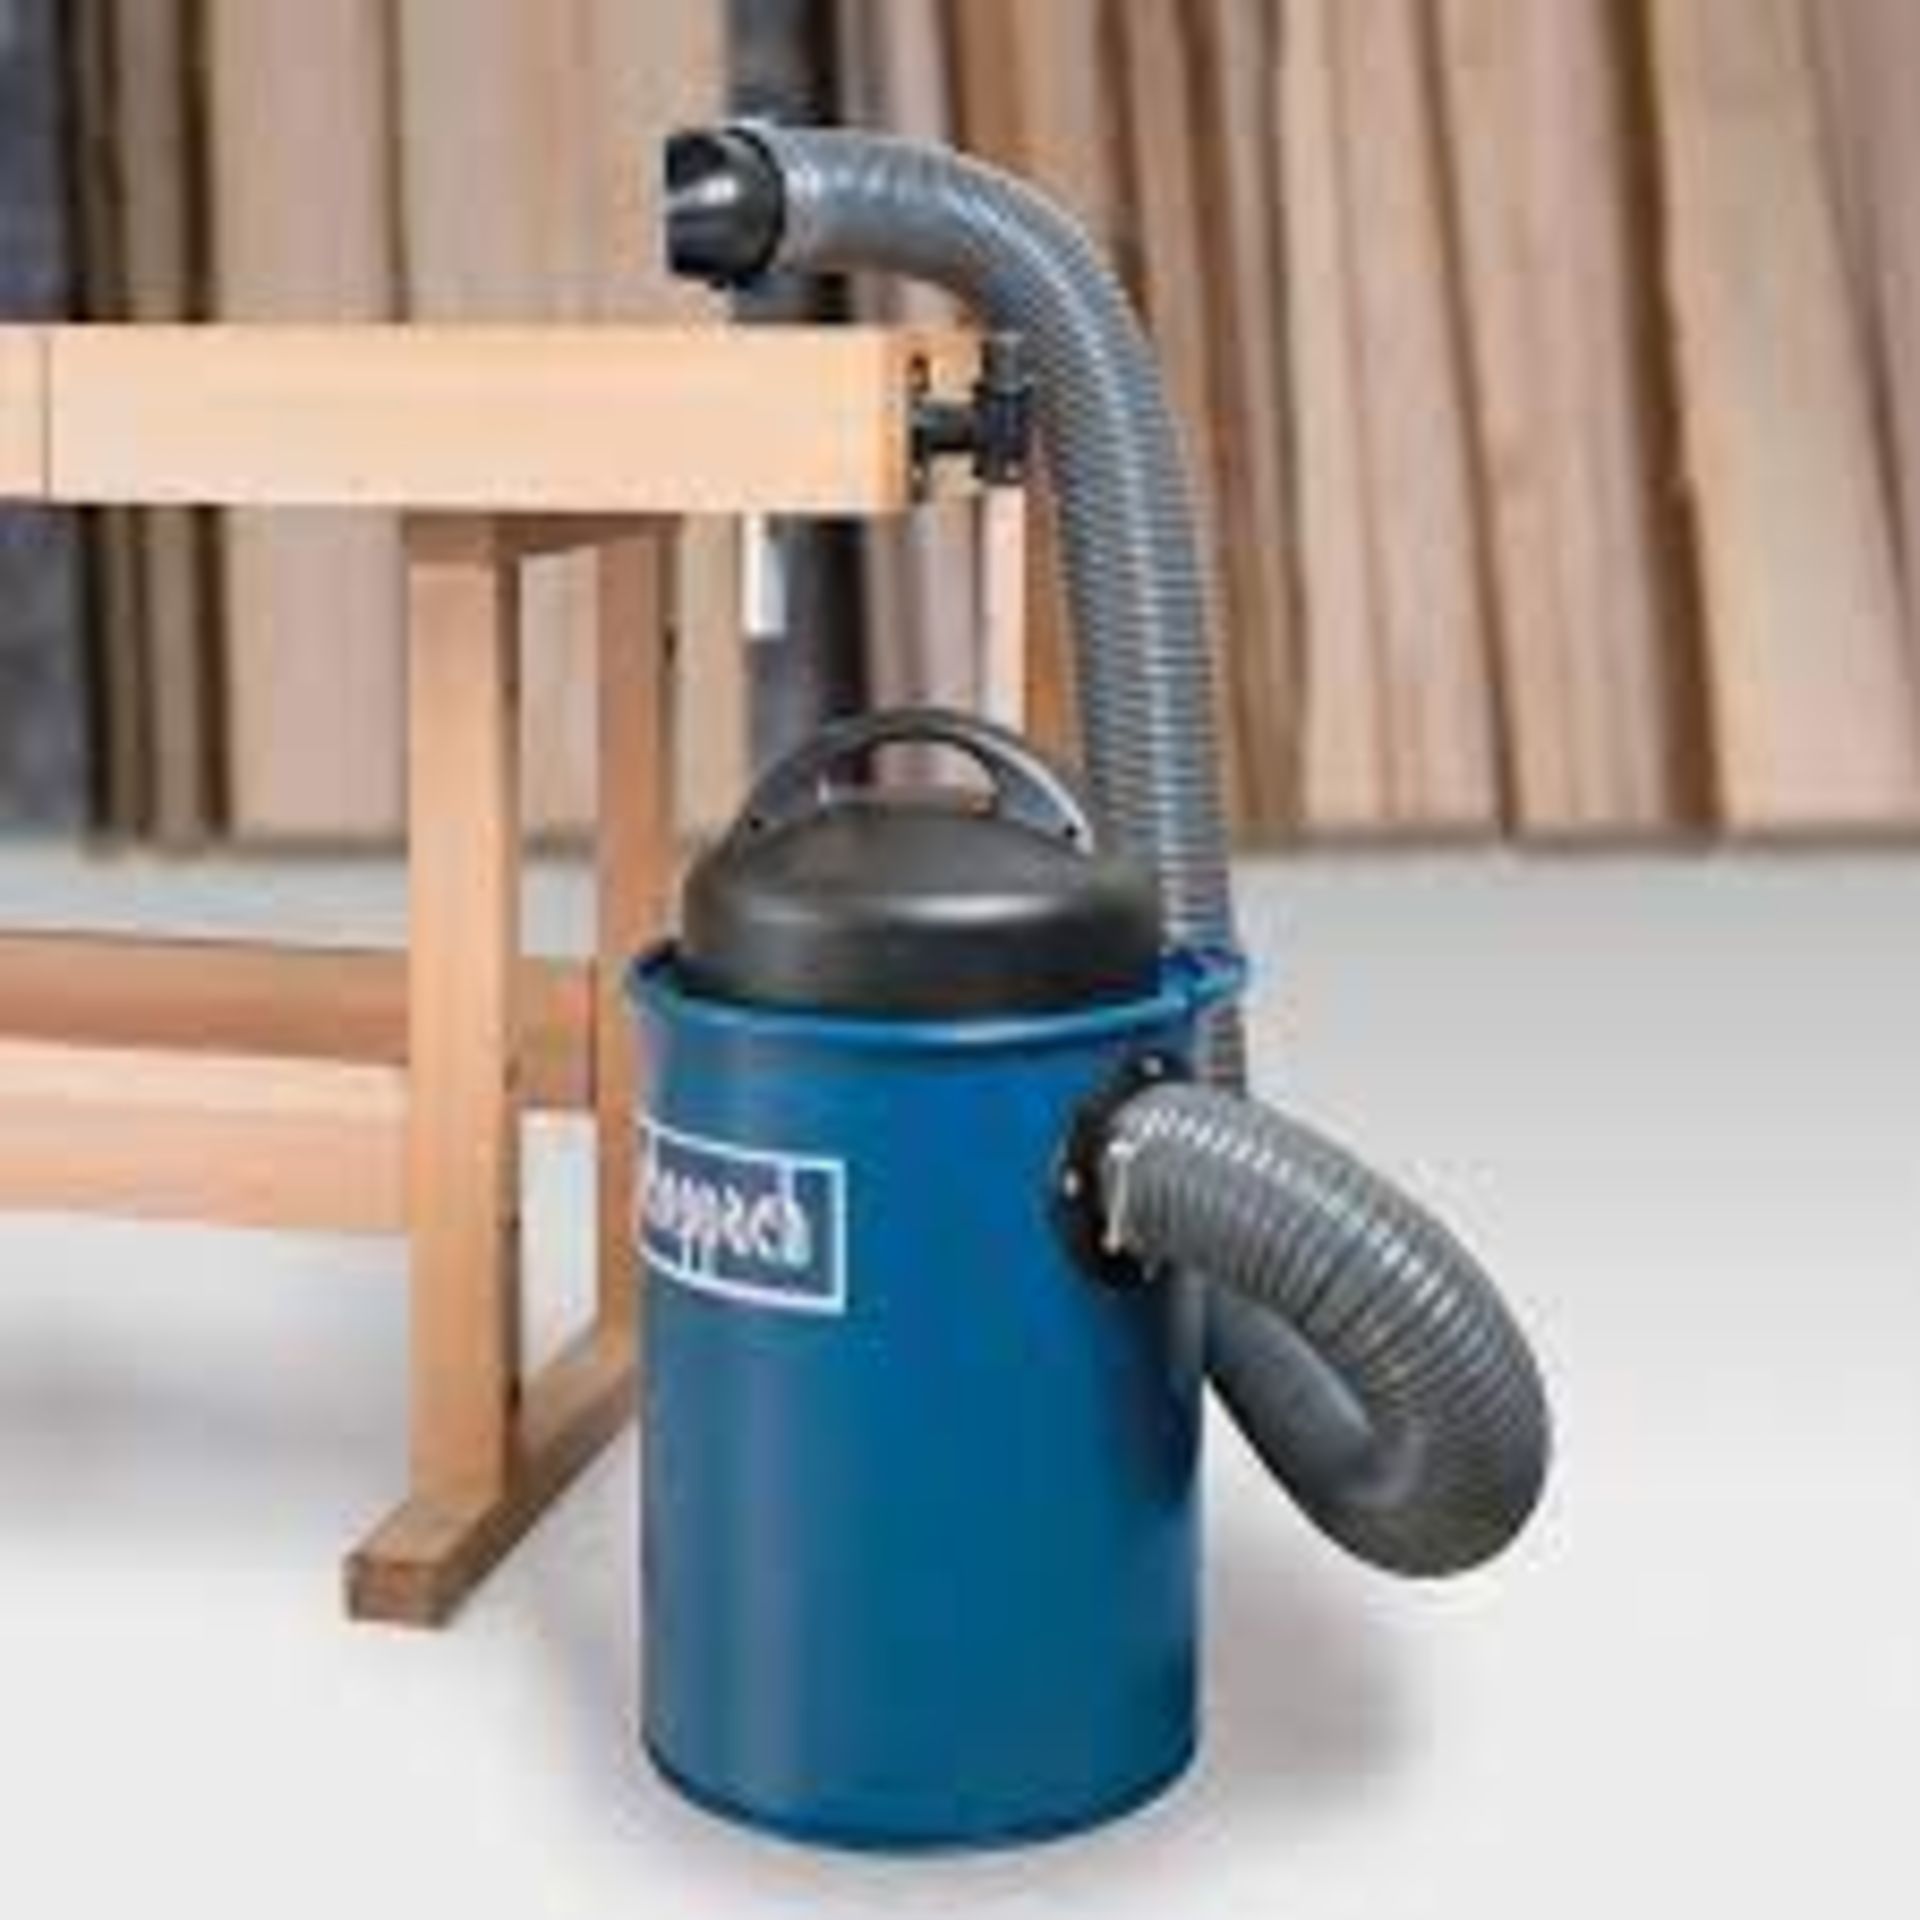 Scheppach HA1000 1100W 50L Dust Extractor. RRP £149. Specialist wood dust extraction unit with a - Image 2 of 2